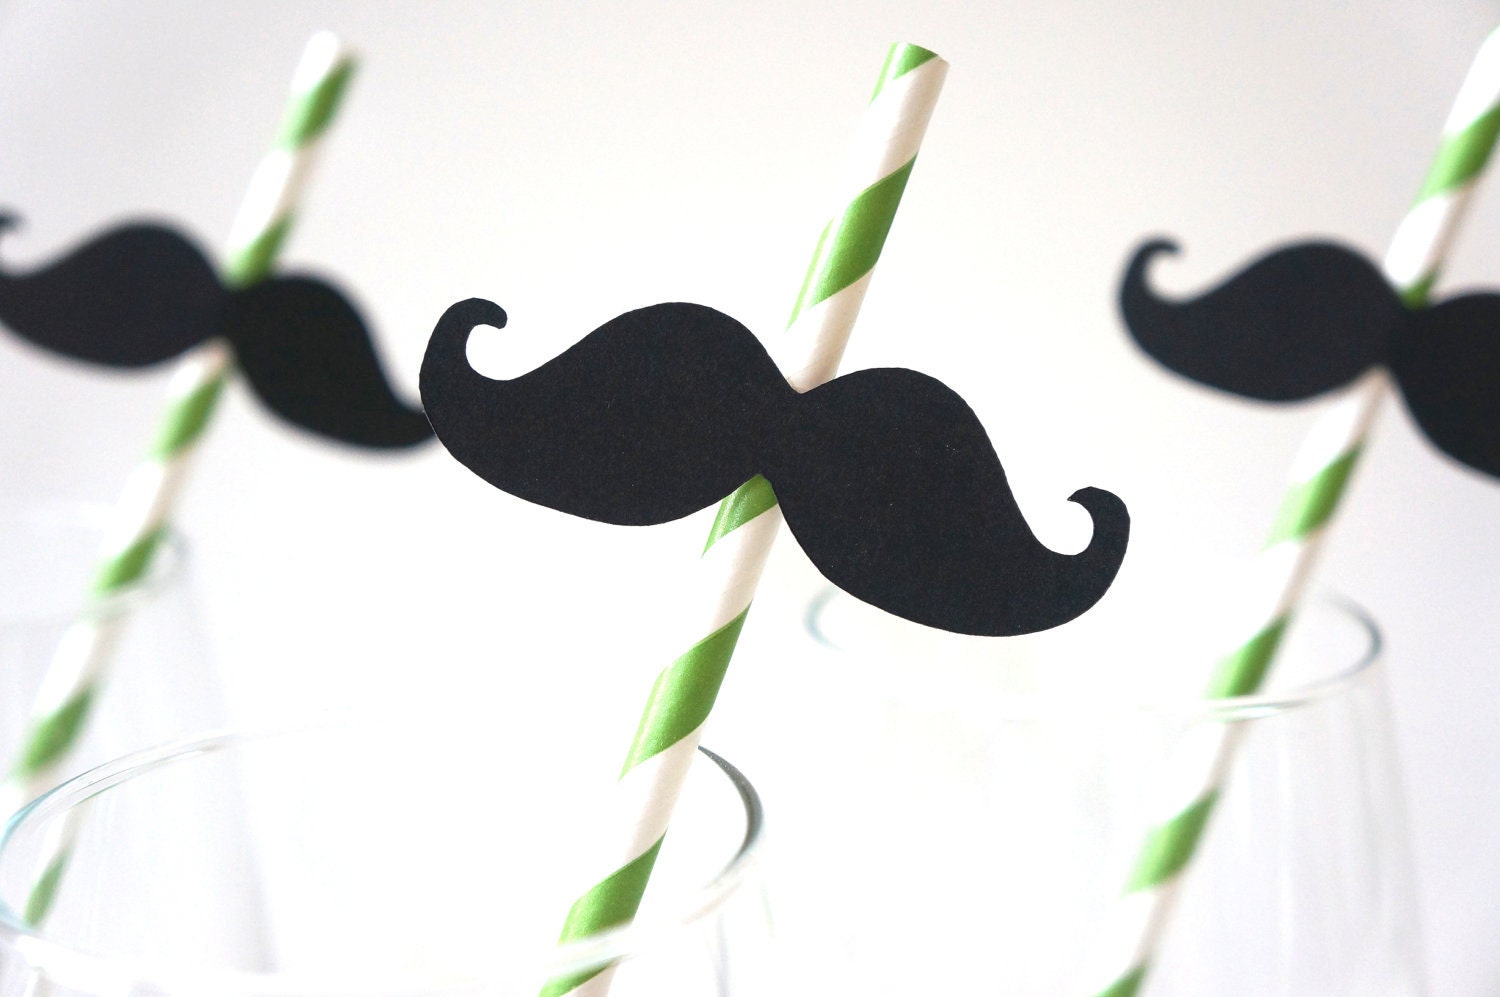 SALE - Photo Booth Props - Mustache Straw Photo Props - Set of 5 - Mustaches on KELLY GREEN Striped Paper Straws